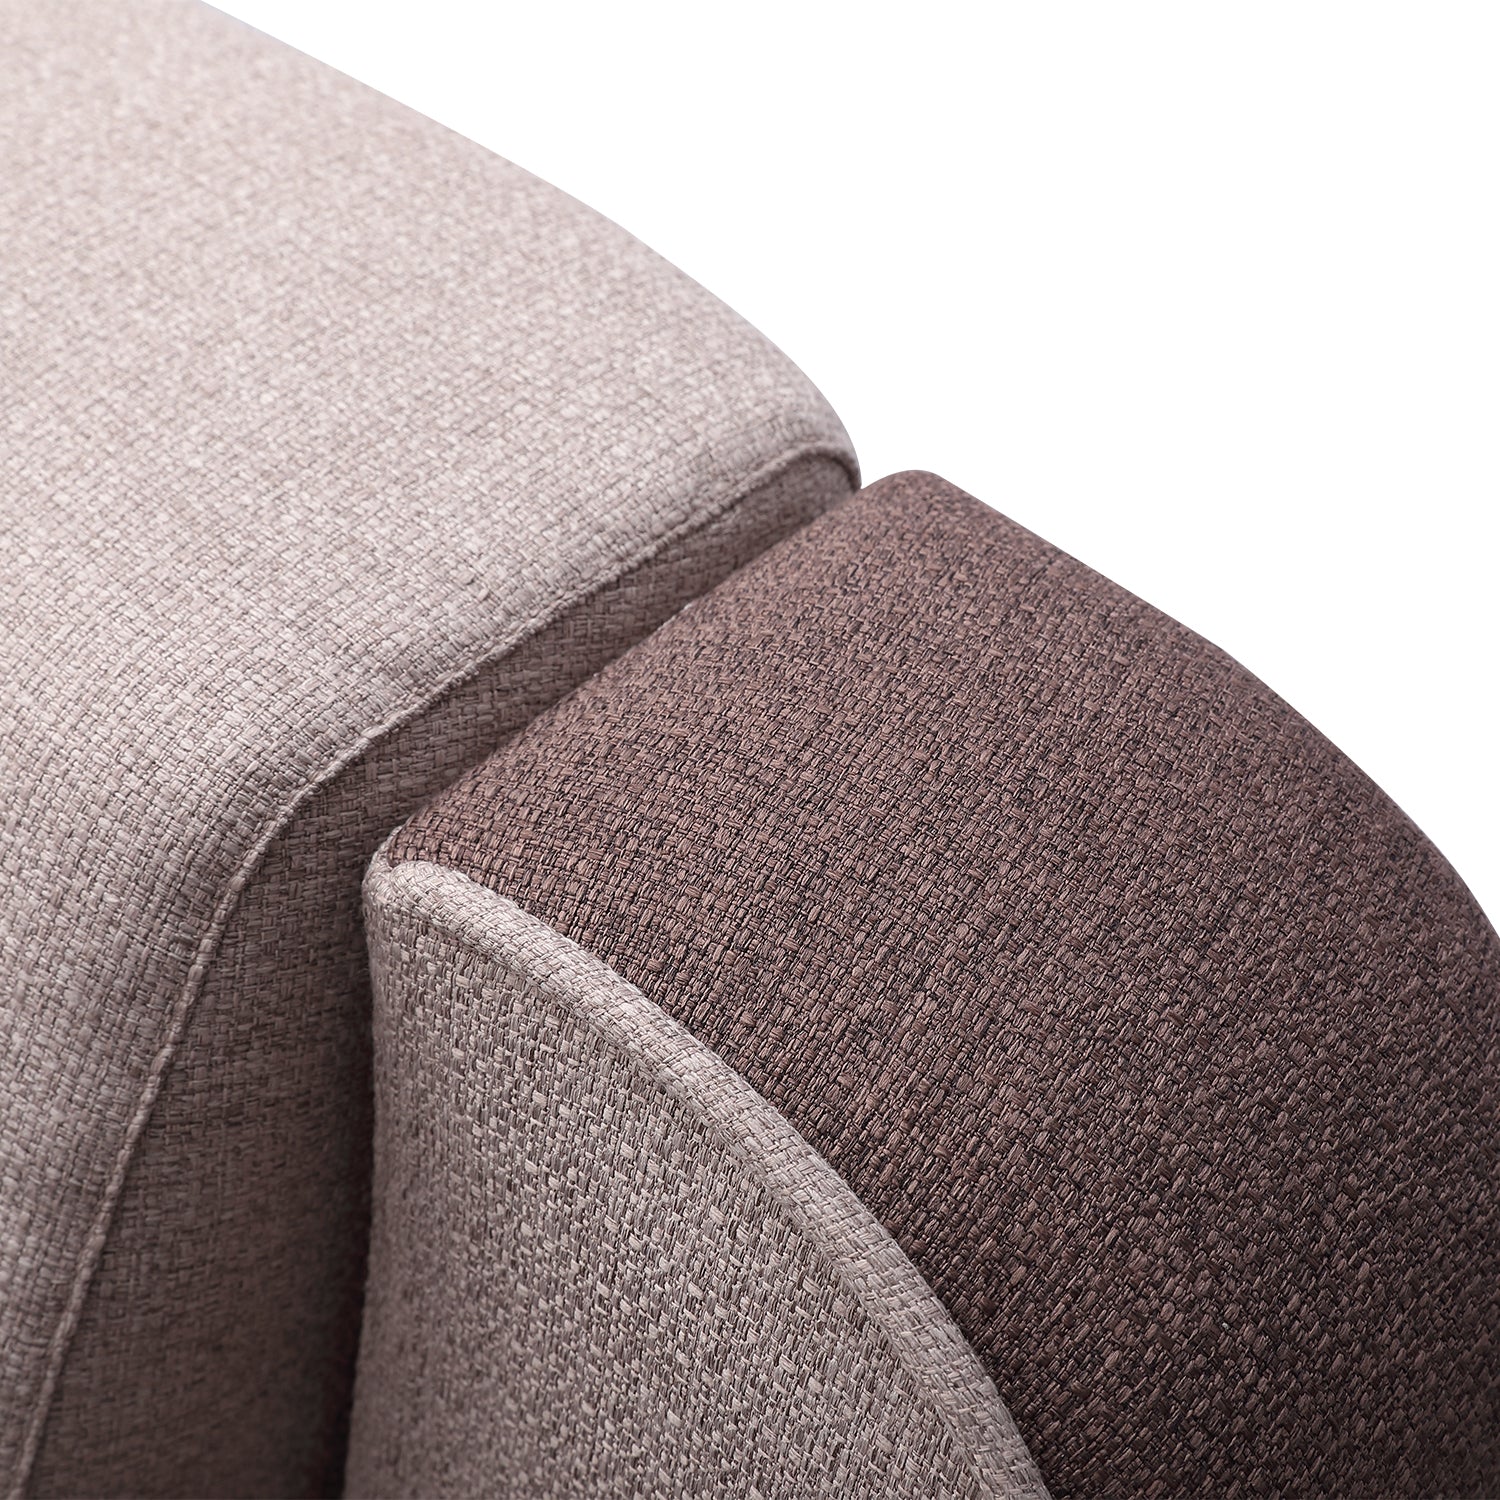 Close-up of DeRUCCI's bed frame upholstery in light beige and dark brown fabric, highlighting the texture and quality.